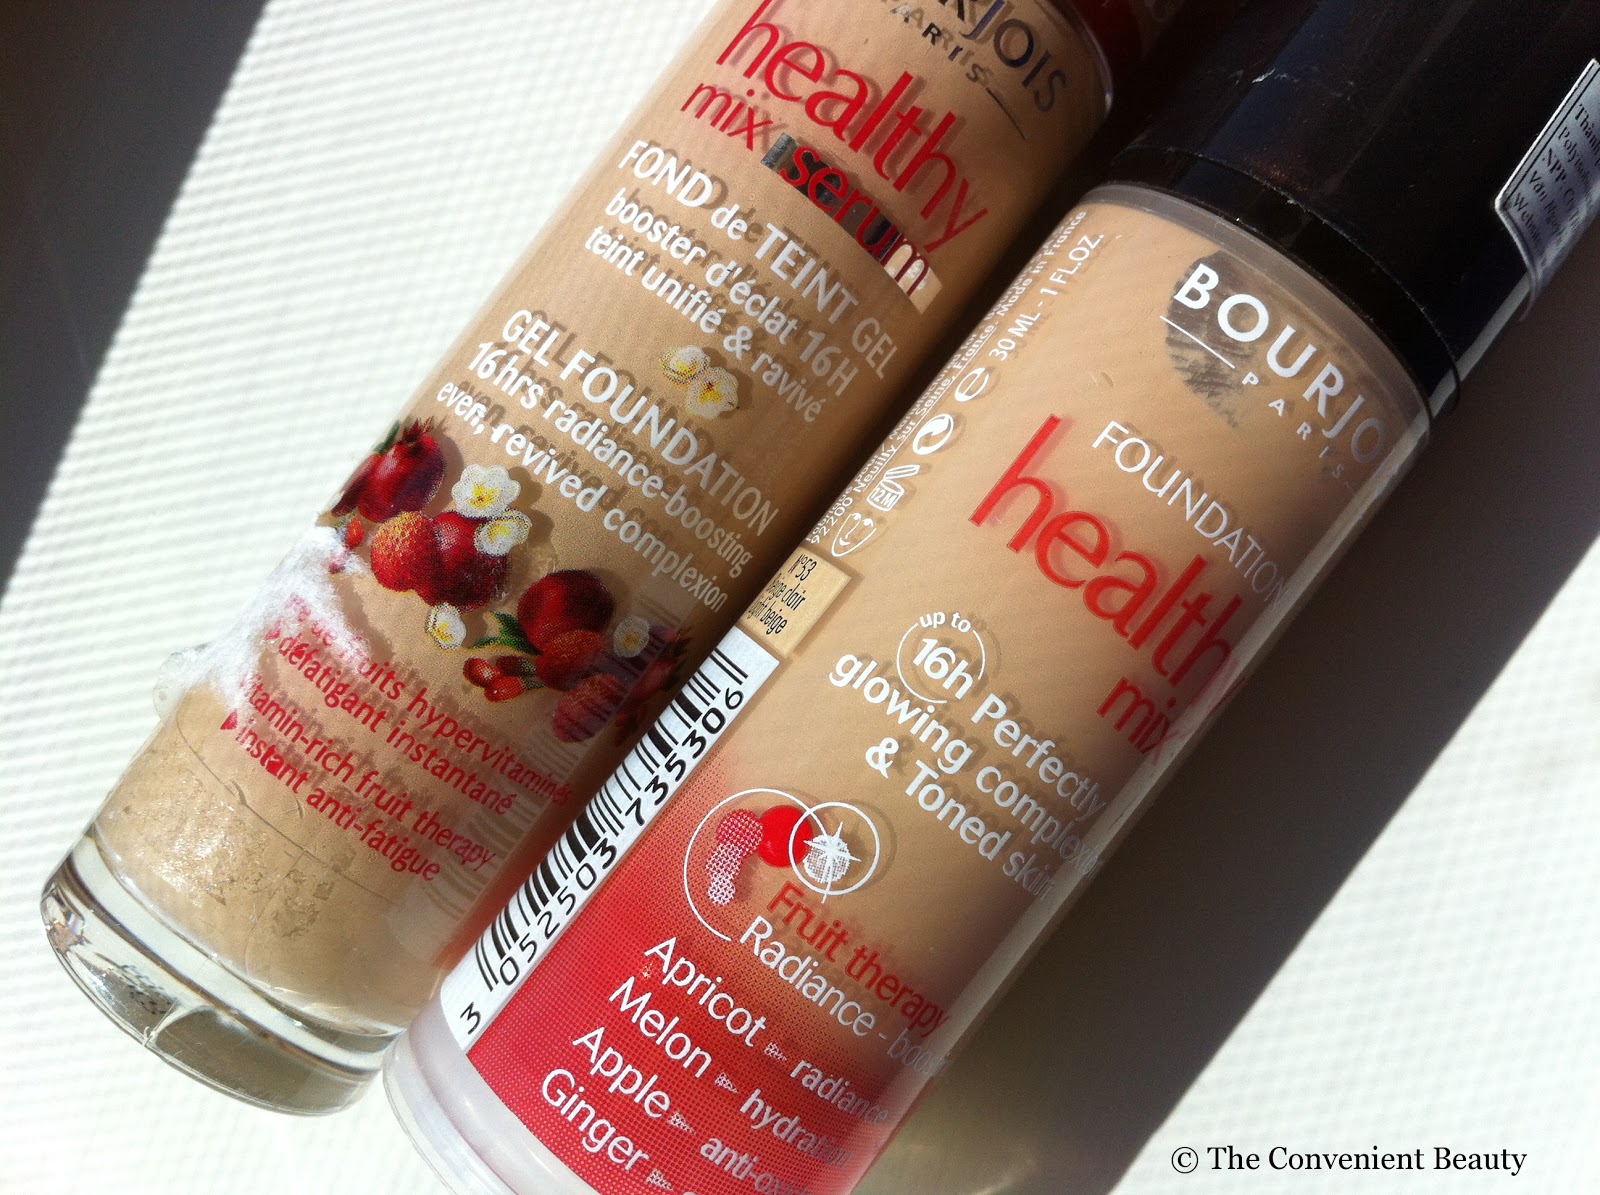 The Convenient Review: Bourjois Foundations Healthy Mix and Healthy Mix Serum 53